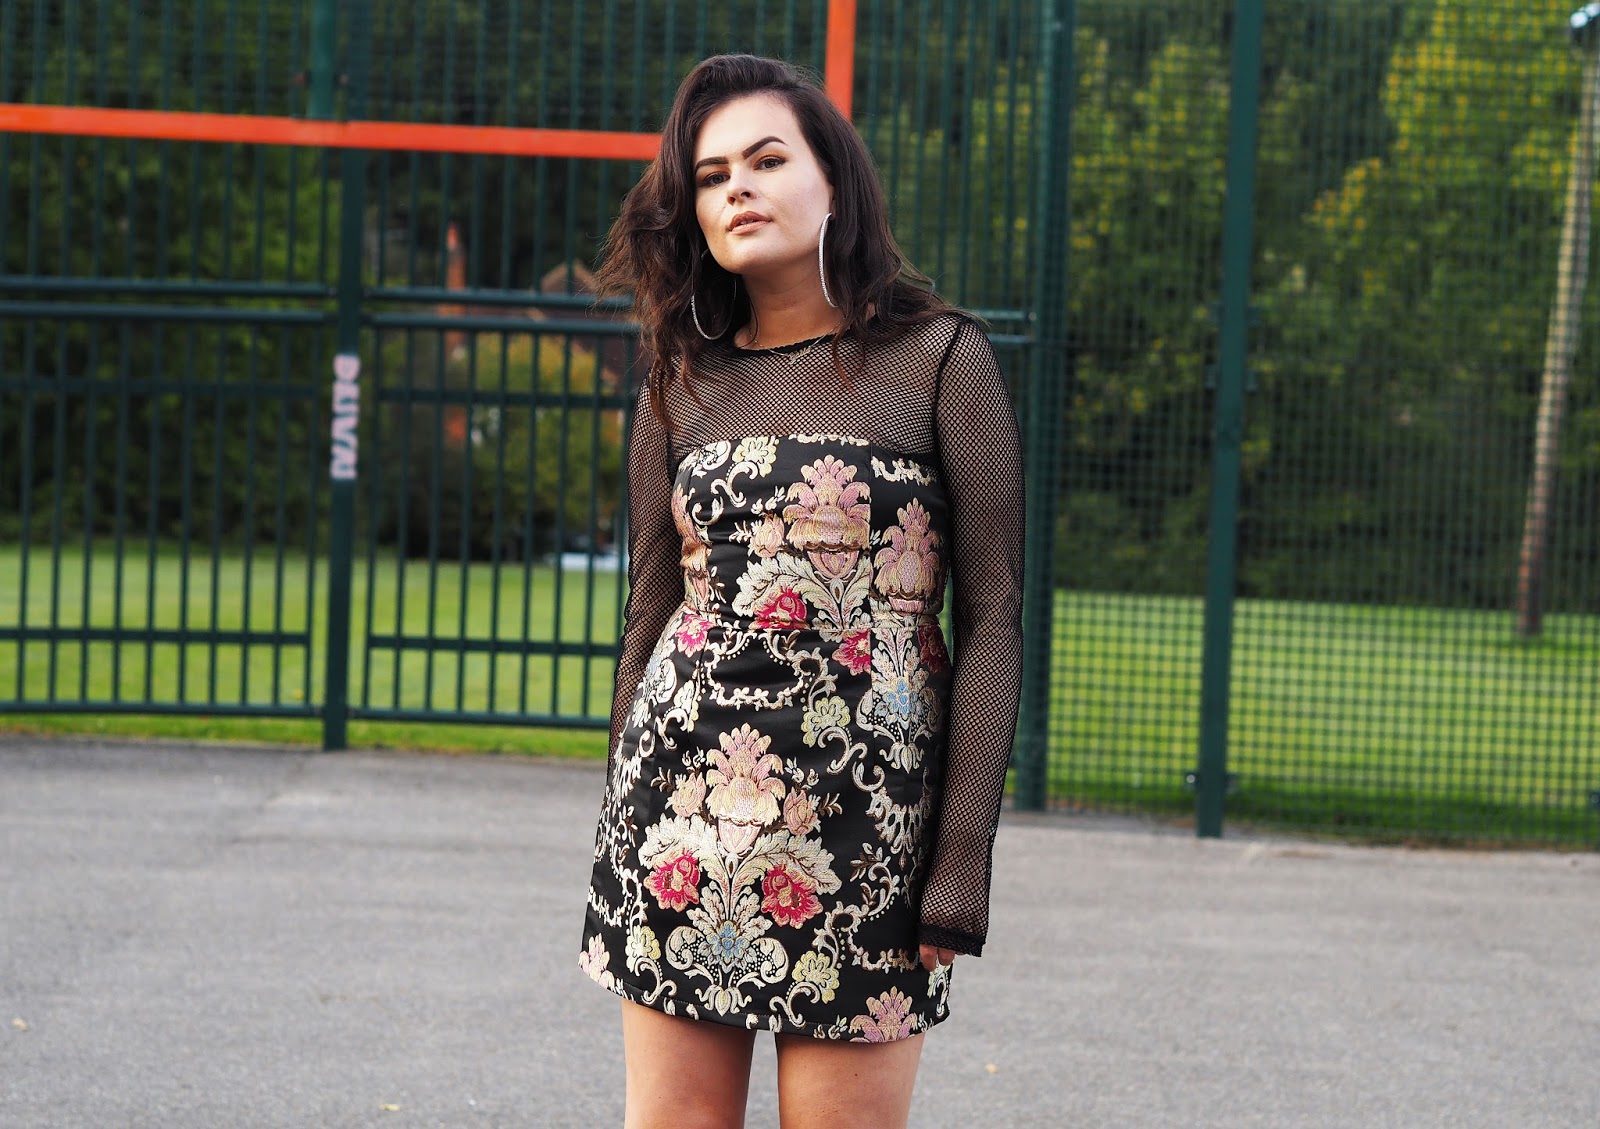 fATE BLACK FLORAL BROCADE BANDEAU DRESS, inthestyle dress, nakd fashion mesh top, nasty gals do it better, 7 things you tell yourself in your twenties, uk fashion blogger